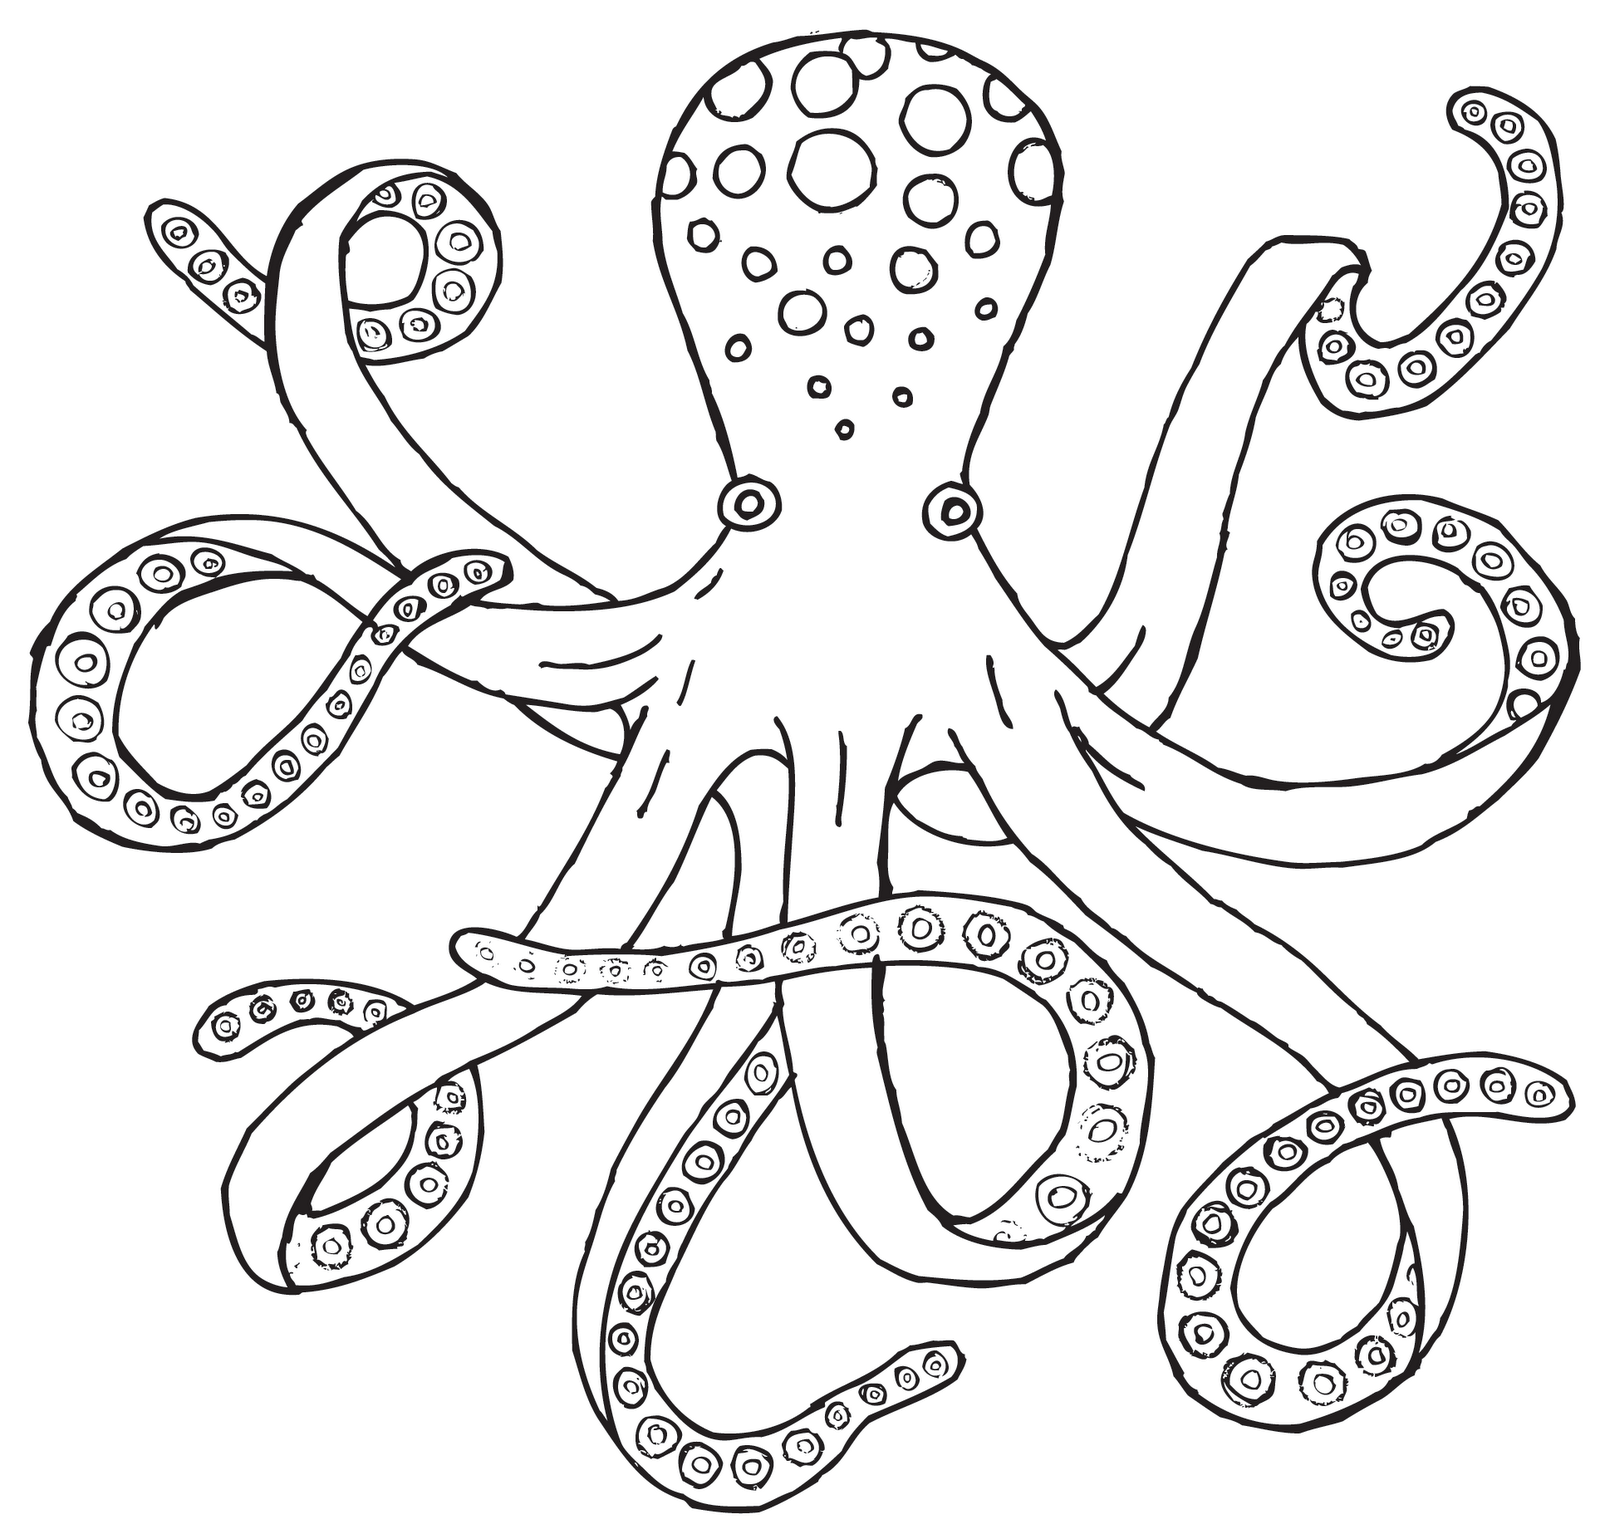 Octopus  black and white octopus drawing black and white clipart